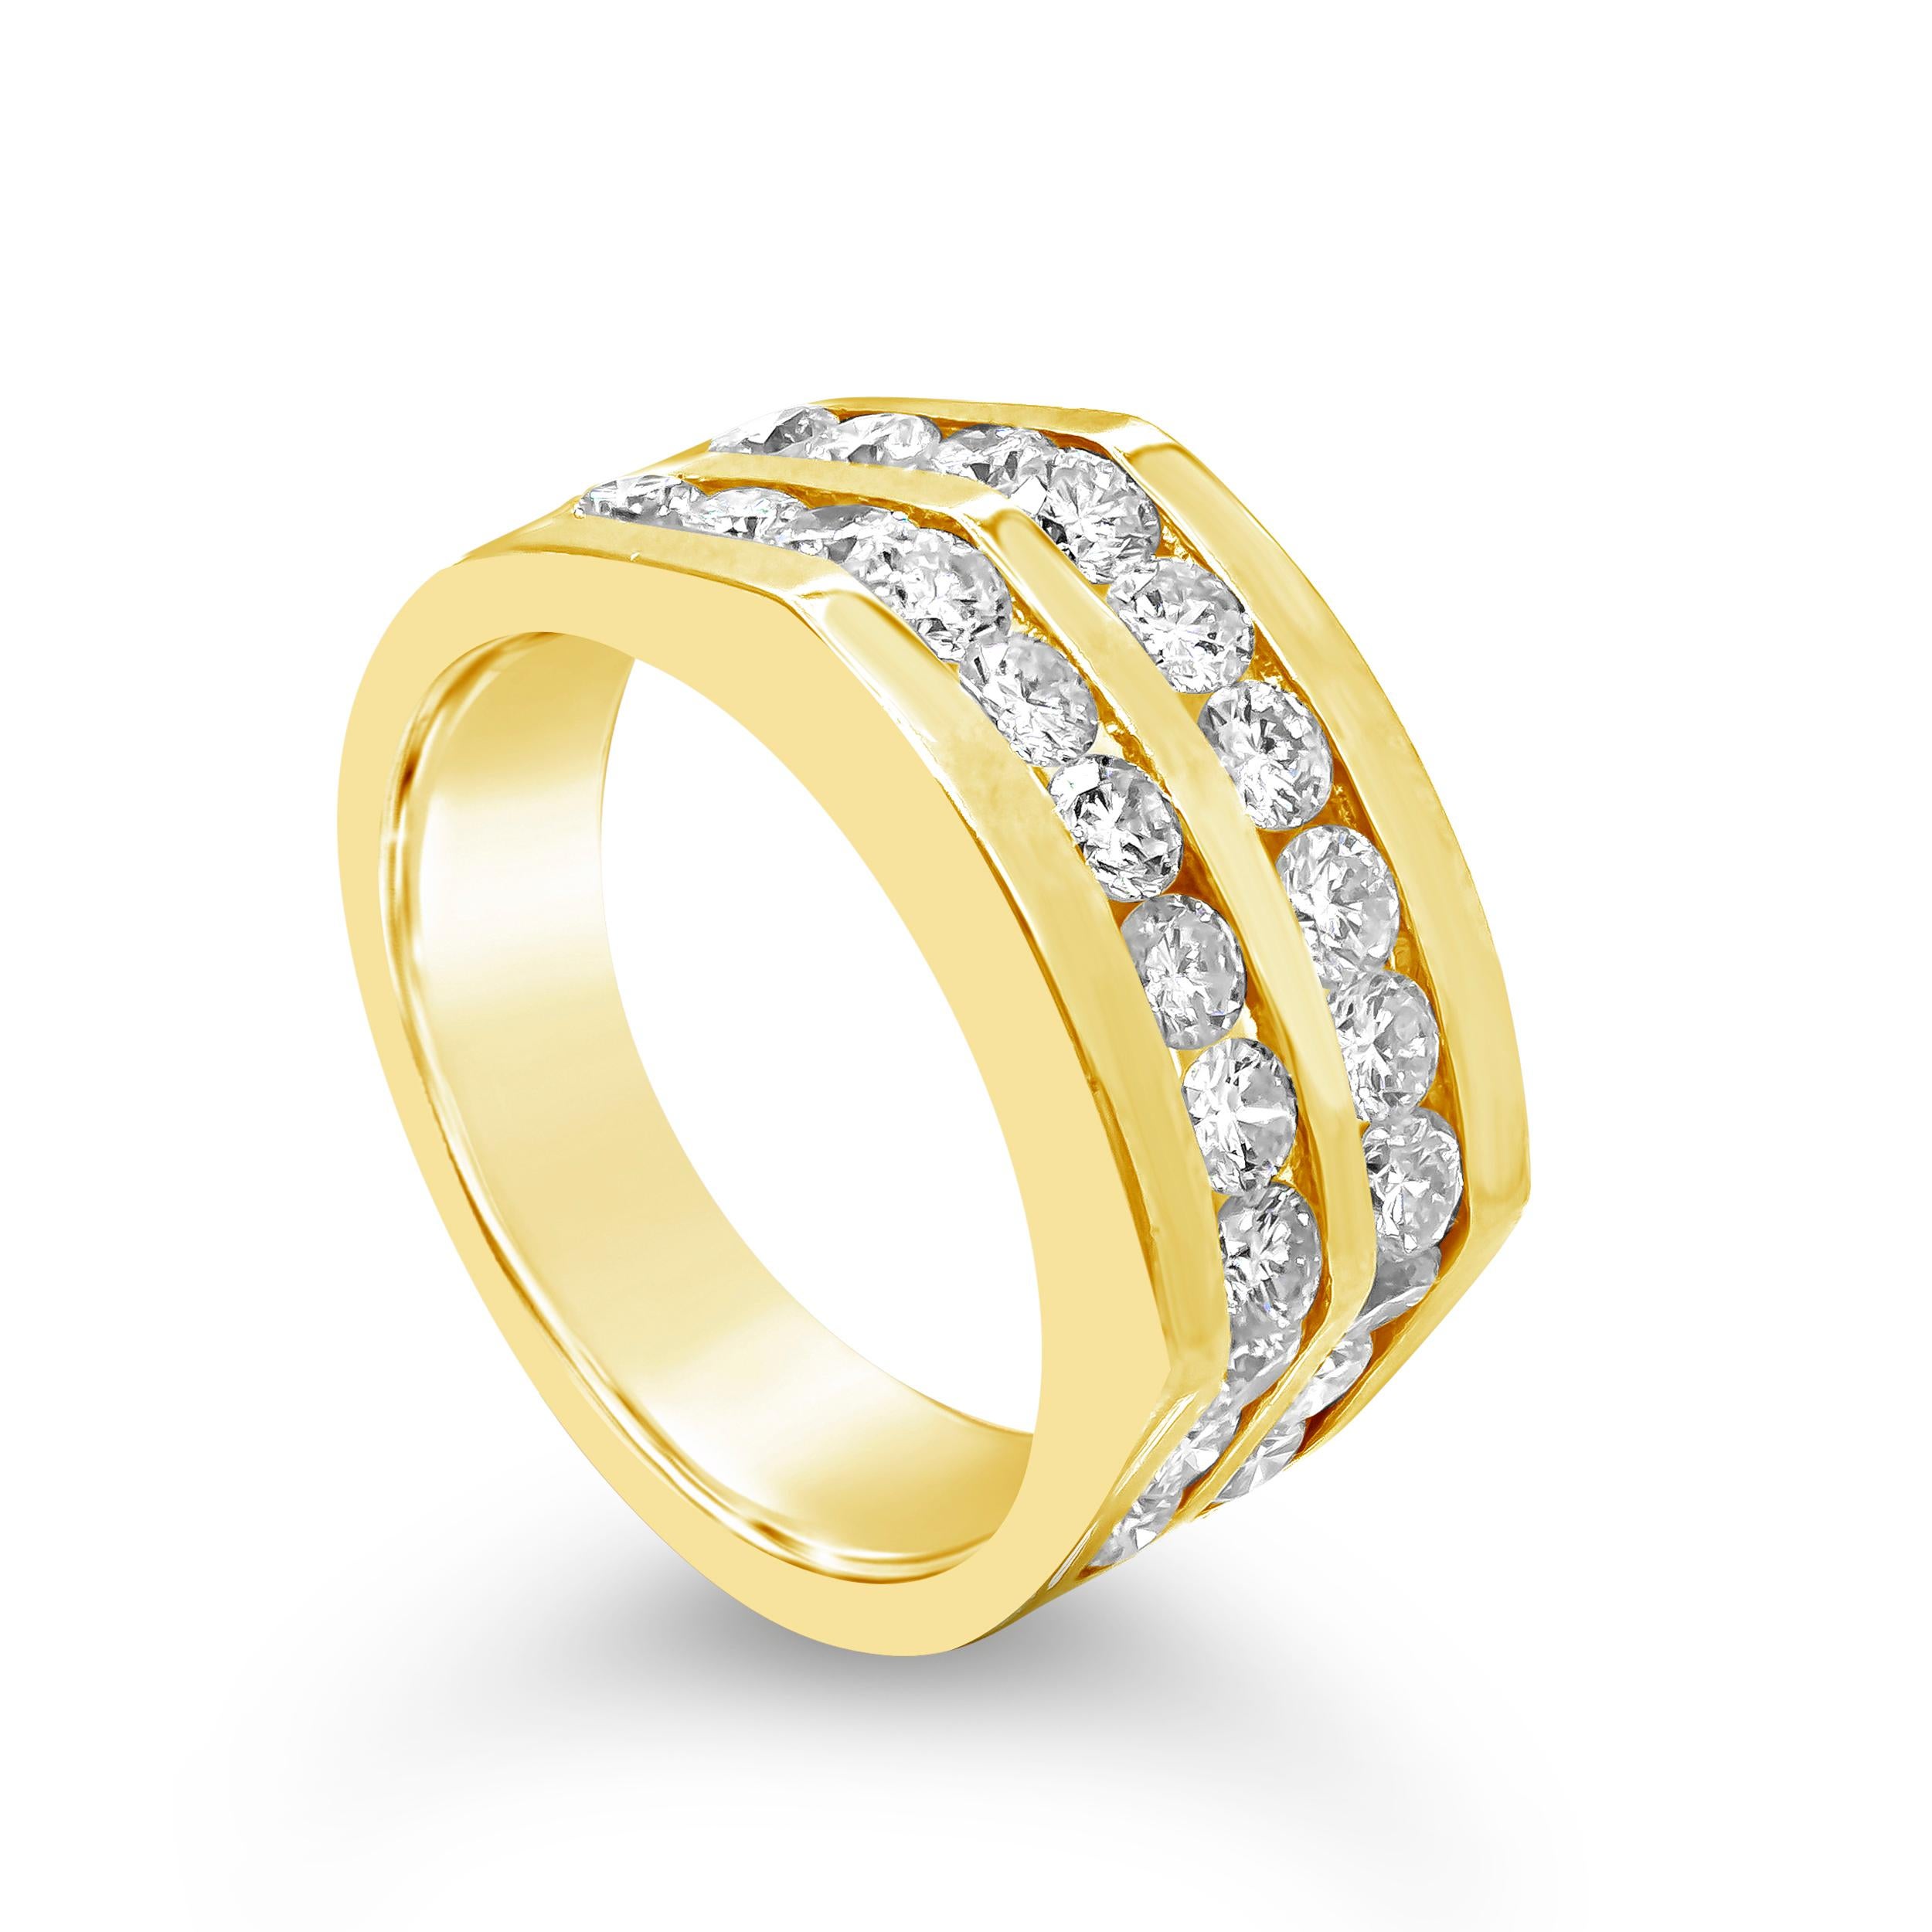 A modern ring design showcasing two rows of round diamonds weighing 2.05 carats total. Half-way channel set in a geometric design. Made with 14K Yellow Gold. Size 8.5 US.

Style available in different price ranges. Prices are based on your